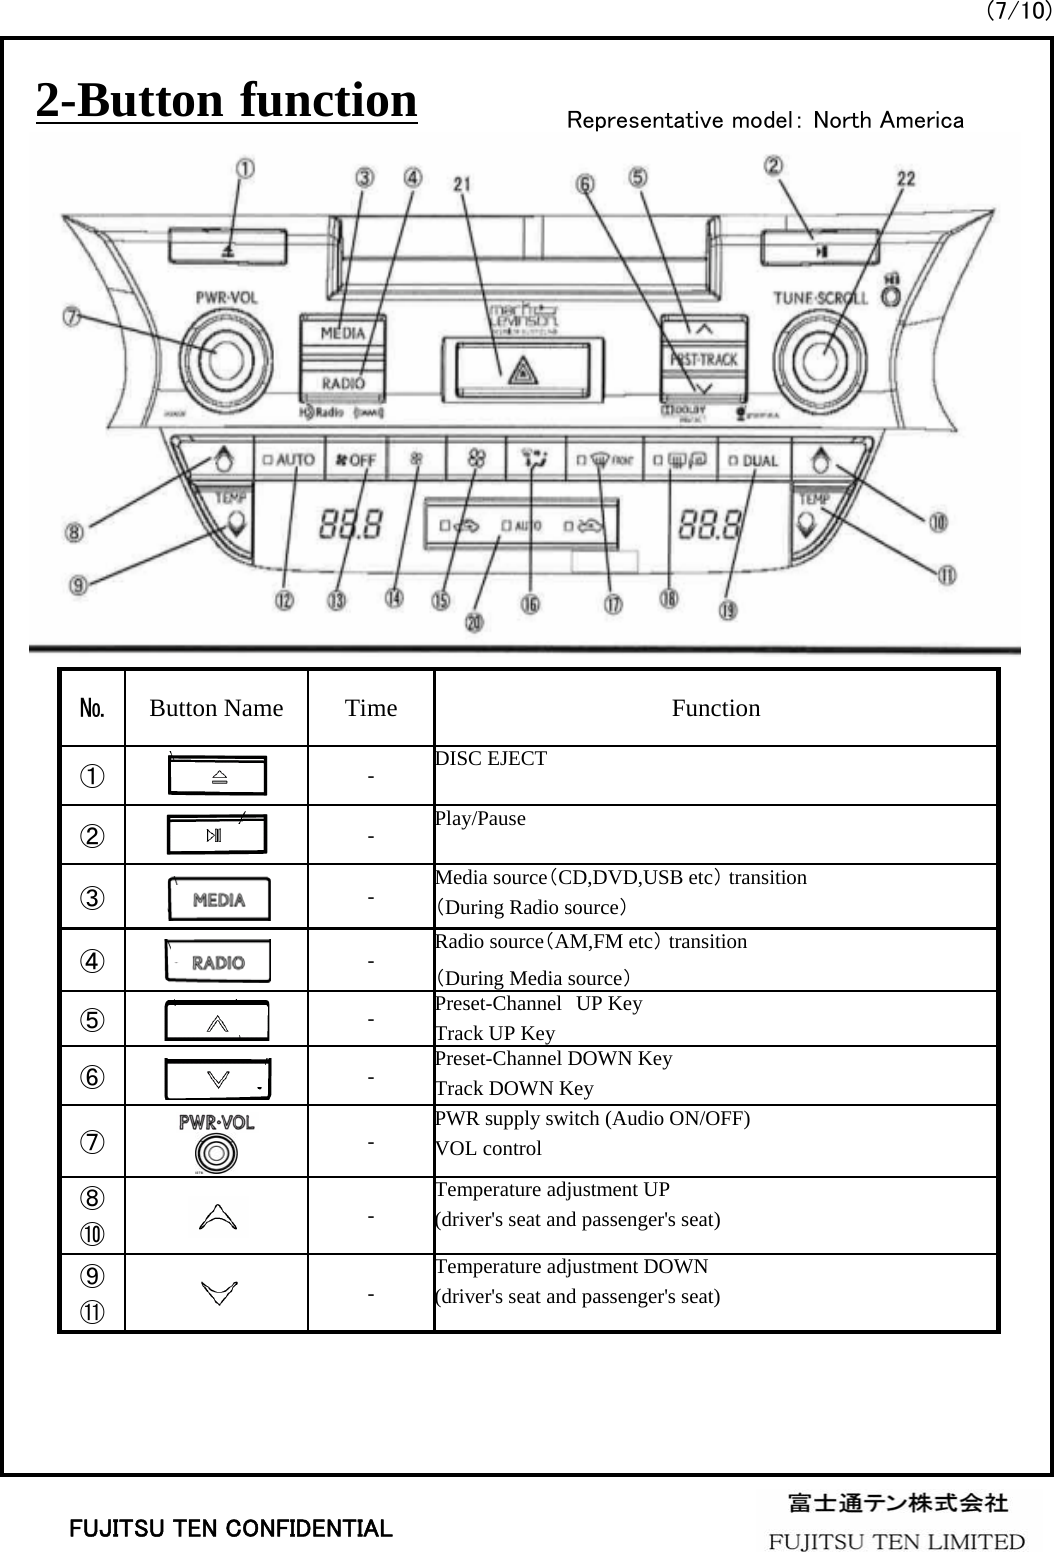 (7/10)2-Button functionTemperature adjustment UP(driver&apos;s seat and passenger&apos;s seat)-⑧⑩PWR supply switch (Audio ON/OFF)VOL control-⑦Temperature adjustment DOWN(driver&apos;s seat and passenger&apos;s seat)-⑨⑪Preset-Channel DOWN KeyTrack DOWN Key-⑥Preset-Channel UP KeyTrack UP Key-⑤Radio source（AM,FM etc）transition（During Media source）-④Media source（CD,DVD,USB etc）transition（During Radio source）-③Play/Pause-②DISC EJECT-①FunctionTimeButton Name№Representative model： North AmericaFUJITSU TEN CONFIDENTIAL